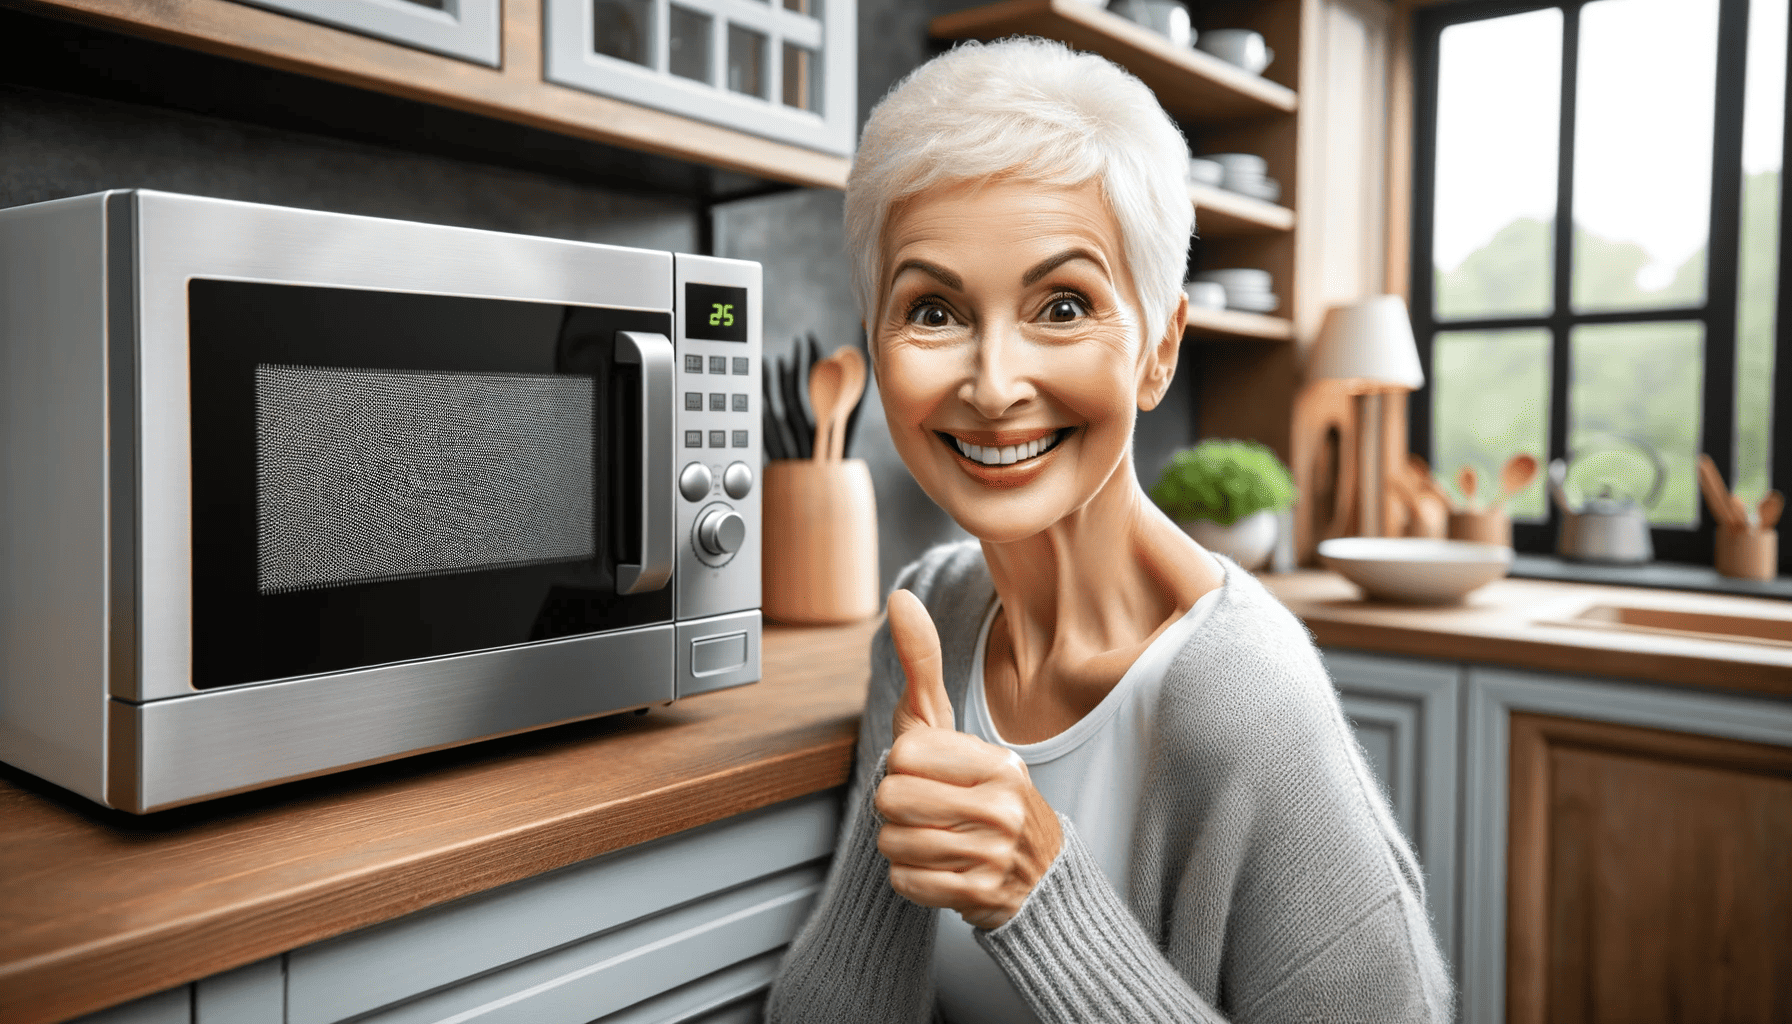 Countertop Microwaves with Large Displays and Easy-to-Use Controls